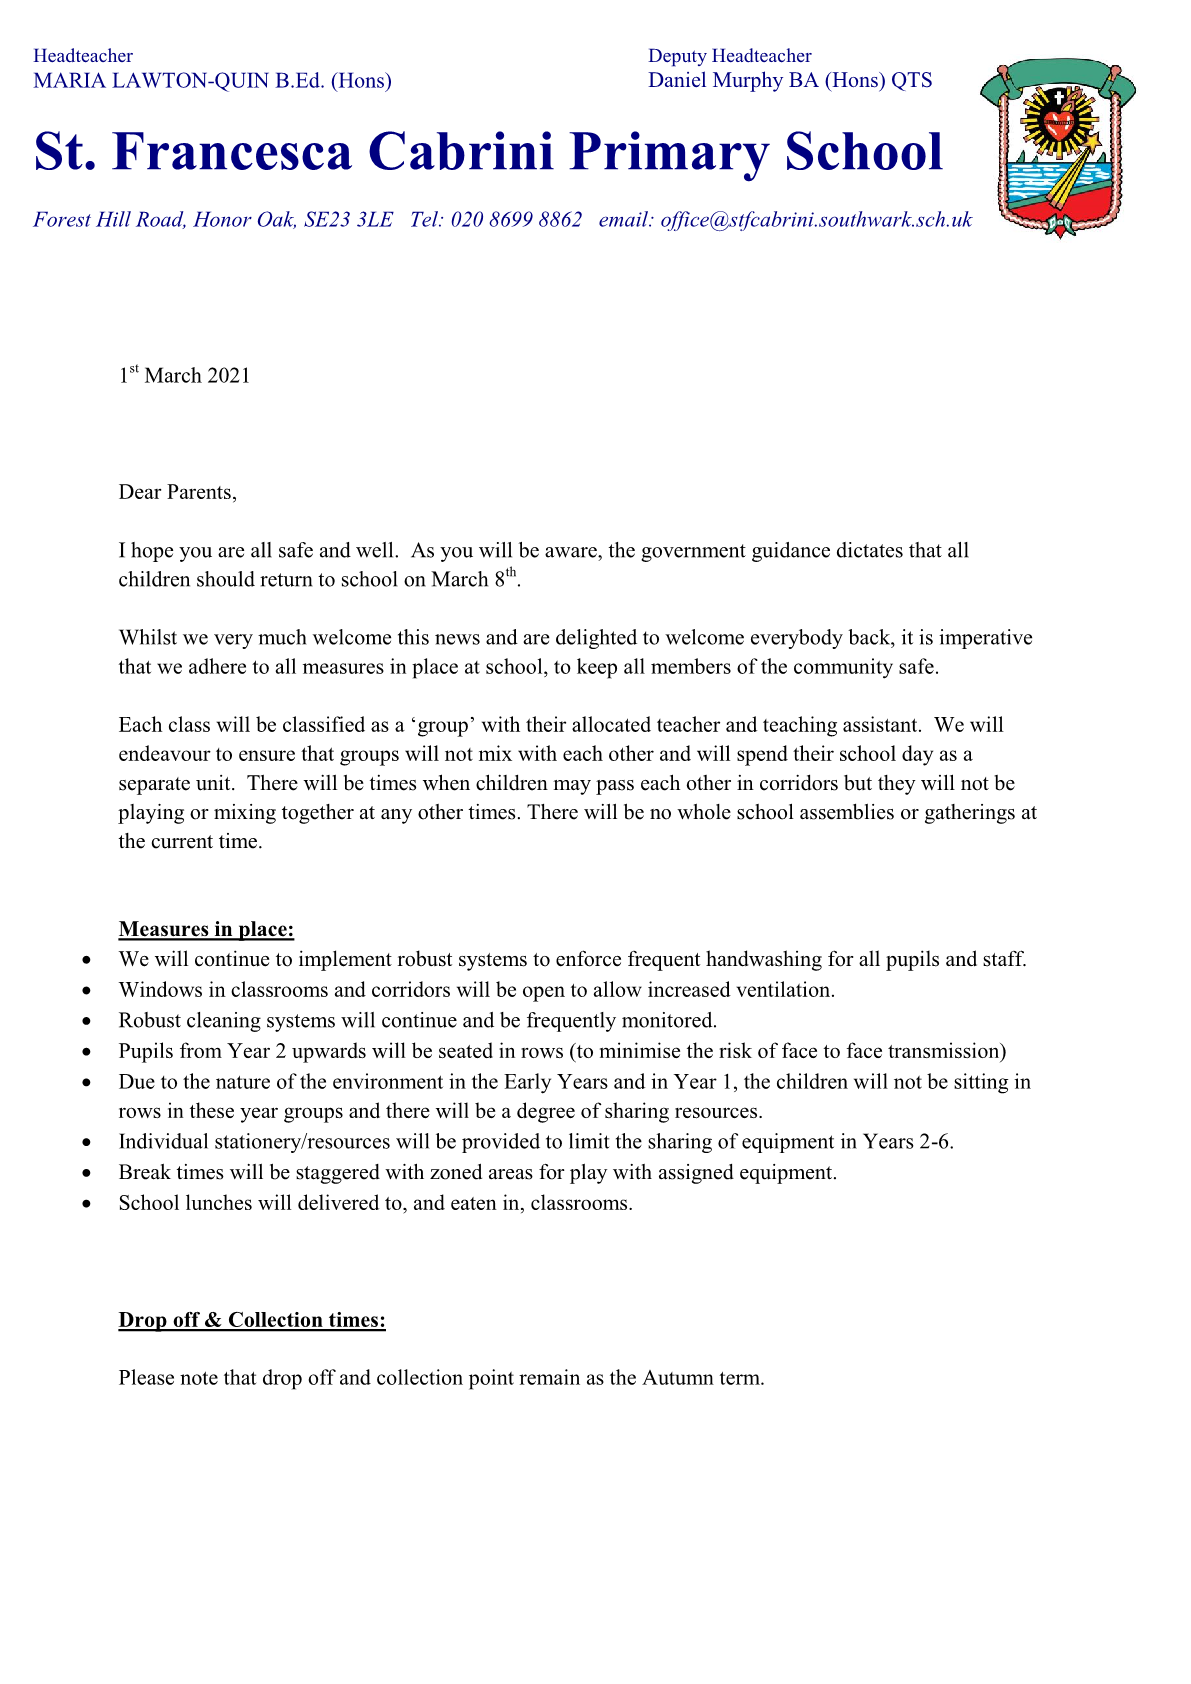 HT Return to School Letter March 2021